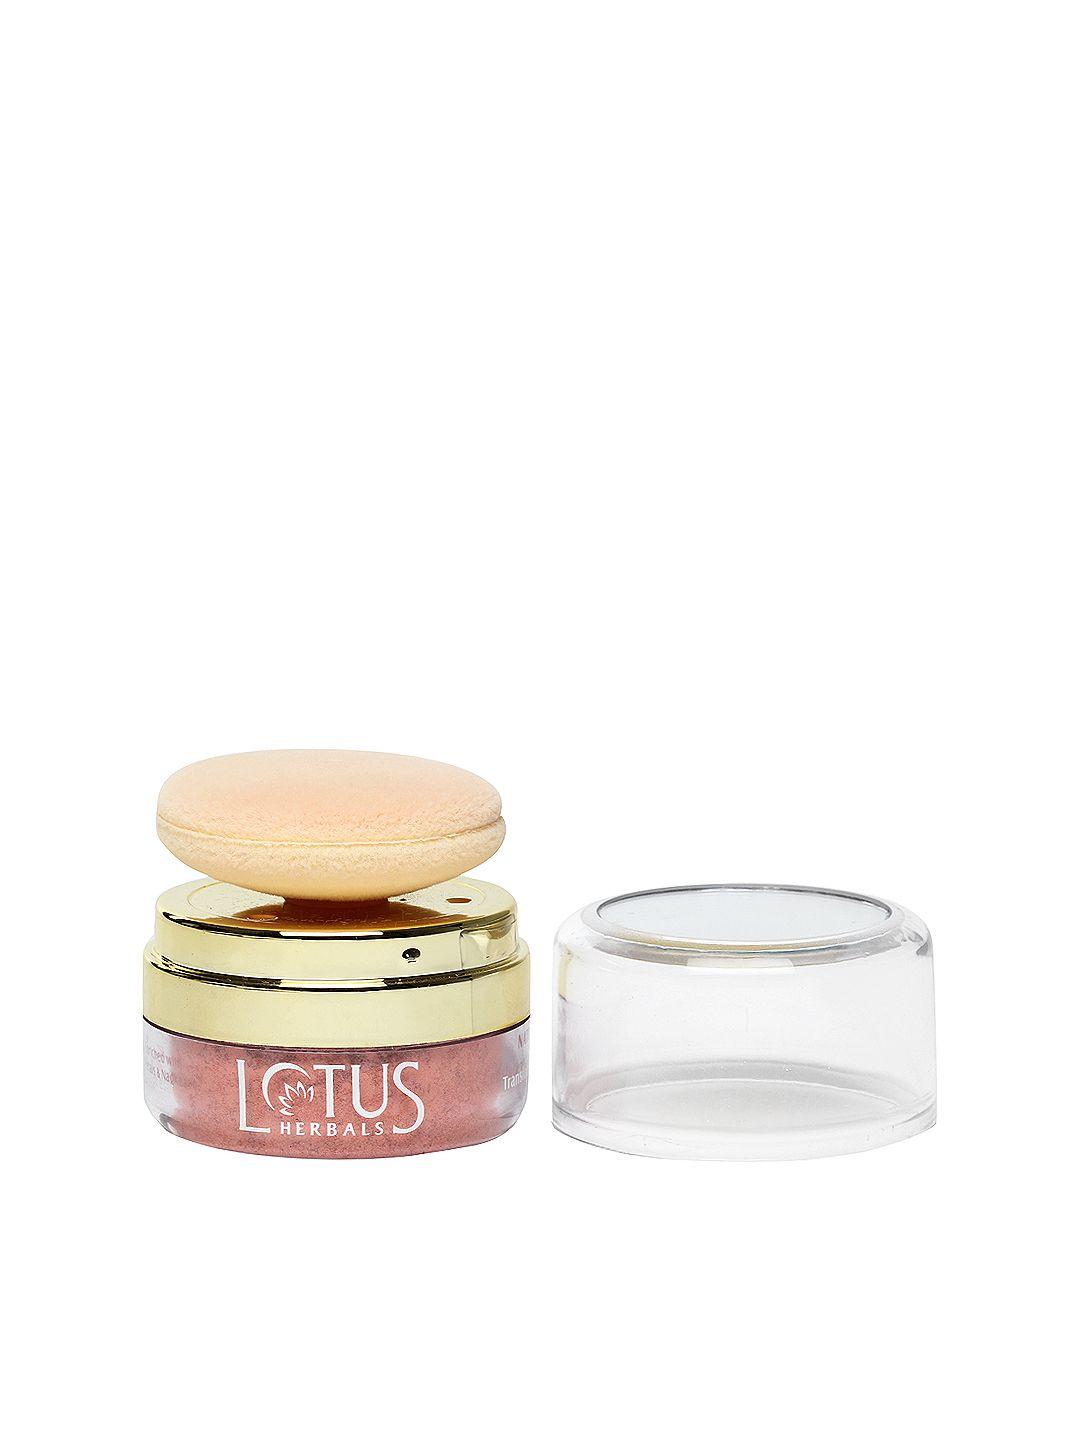 lotus herbals sustainable natural blend spf-15 translucent loose powder - rouge lustre 840 10 g